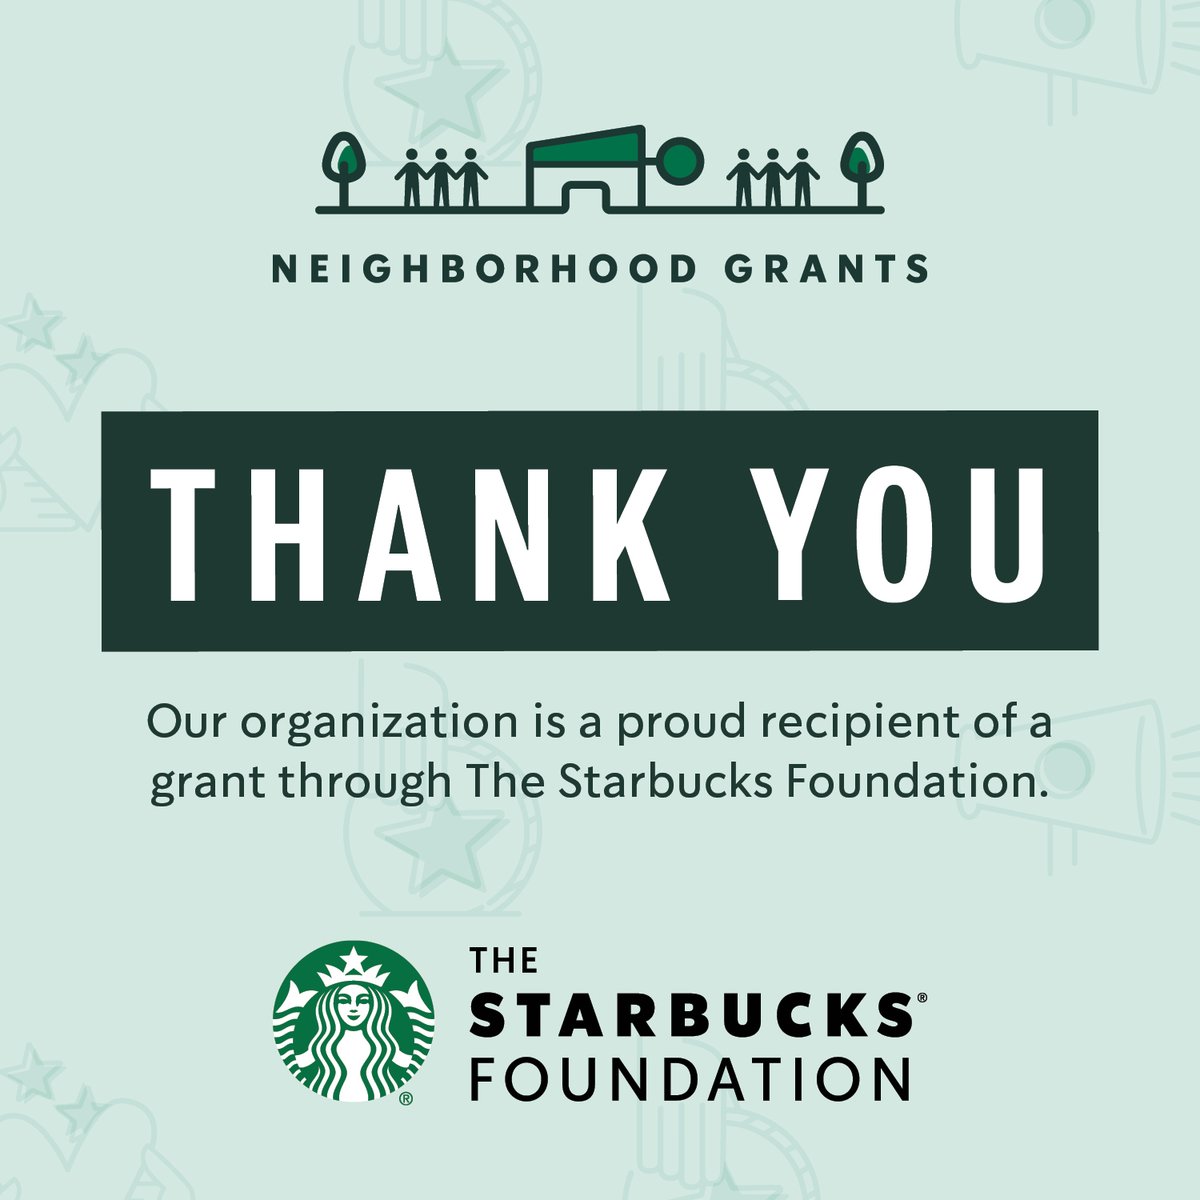 We’re proud to be selected for #TheStarbucksFoundation #NeighborhoodGrants, thanks to local @Starbucks partners (employees) in our community!